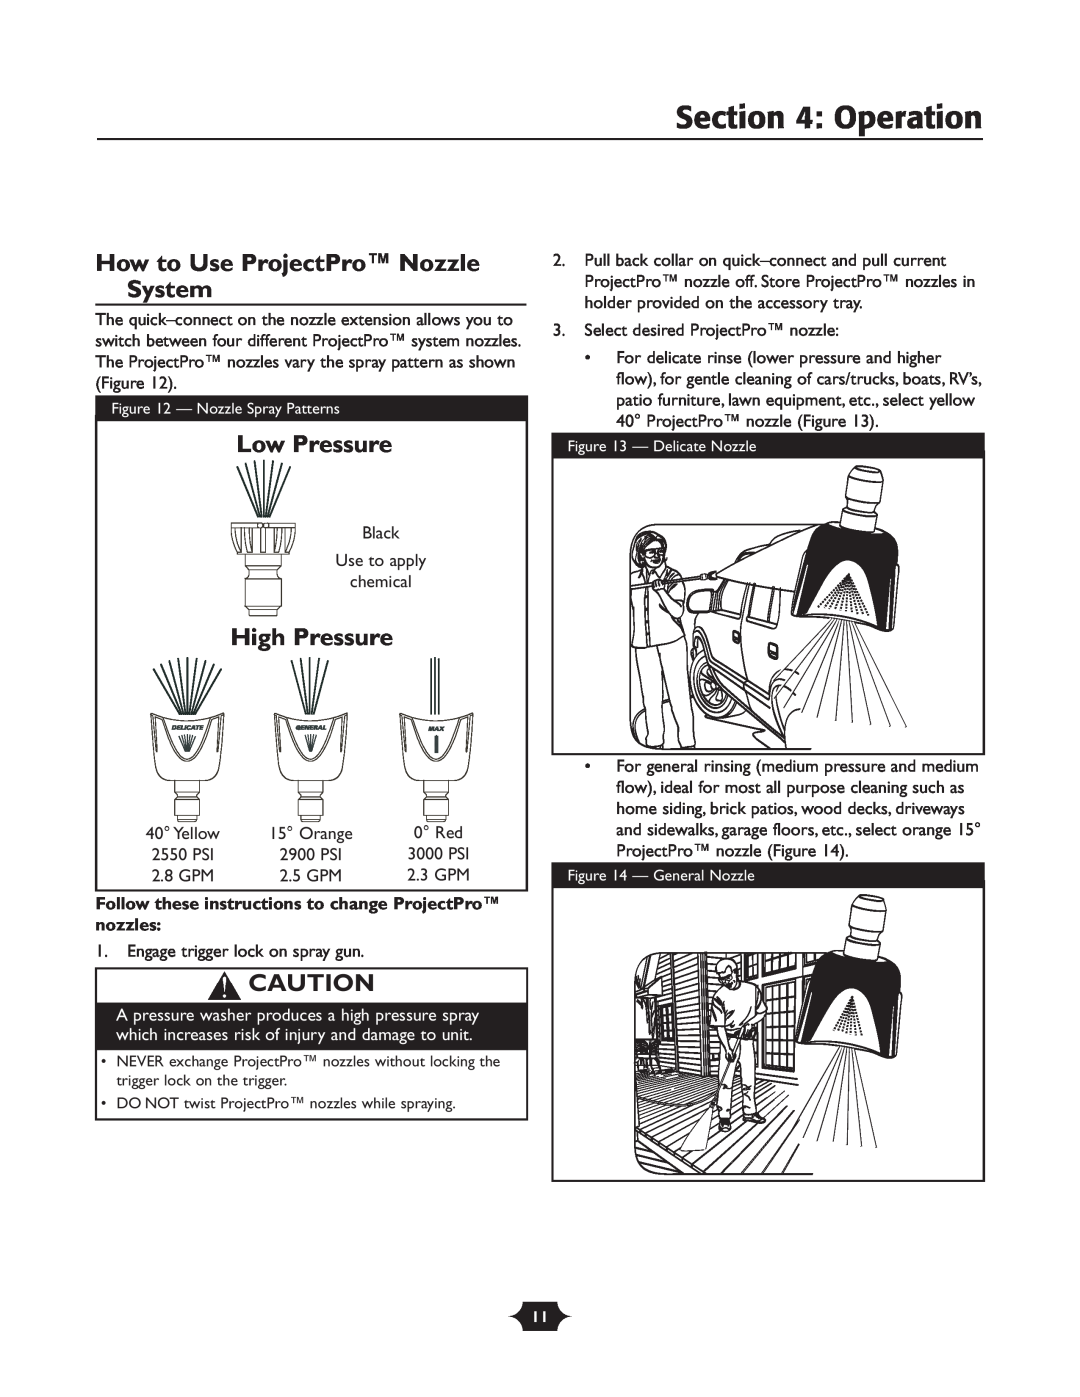 Troy-Bilt 020242-1 How to Use ProjectPro Nozzle System, Low Pressure, Operation, High Pressure, Nozzle Spray Patterns 